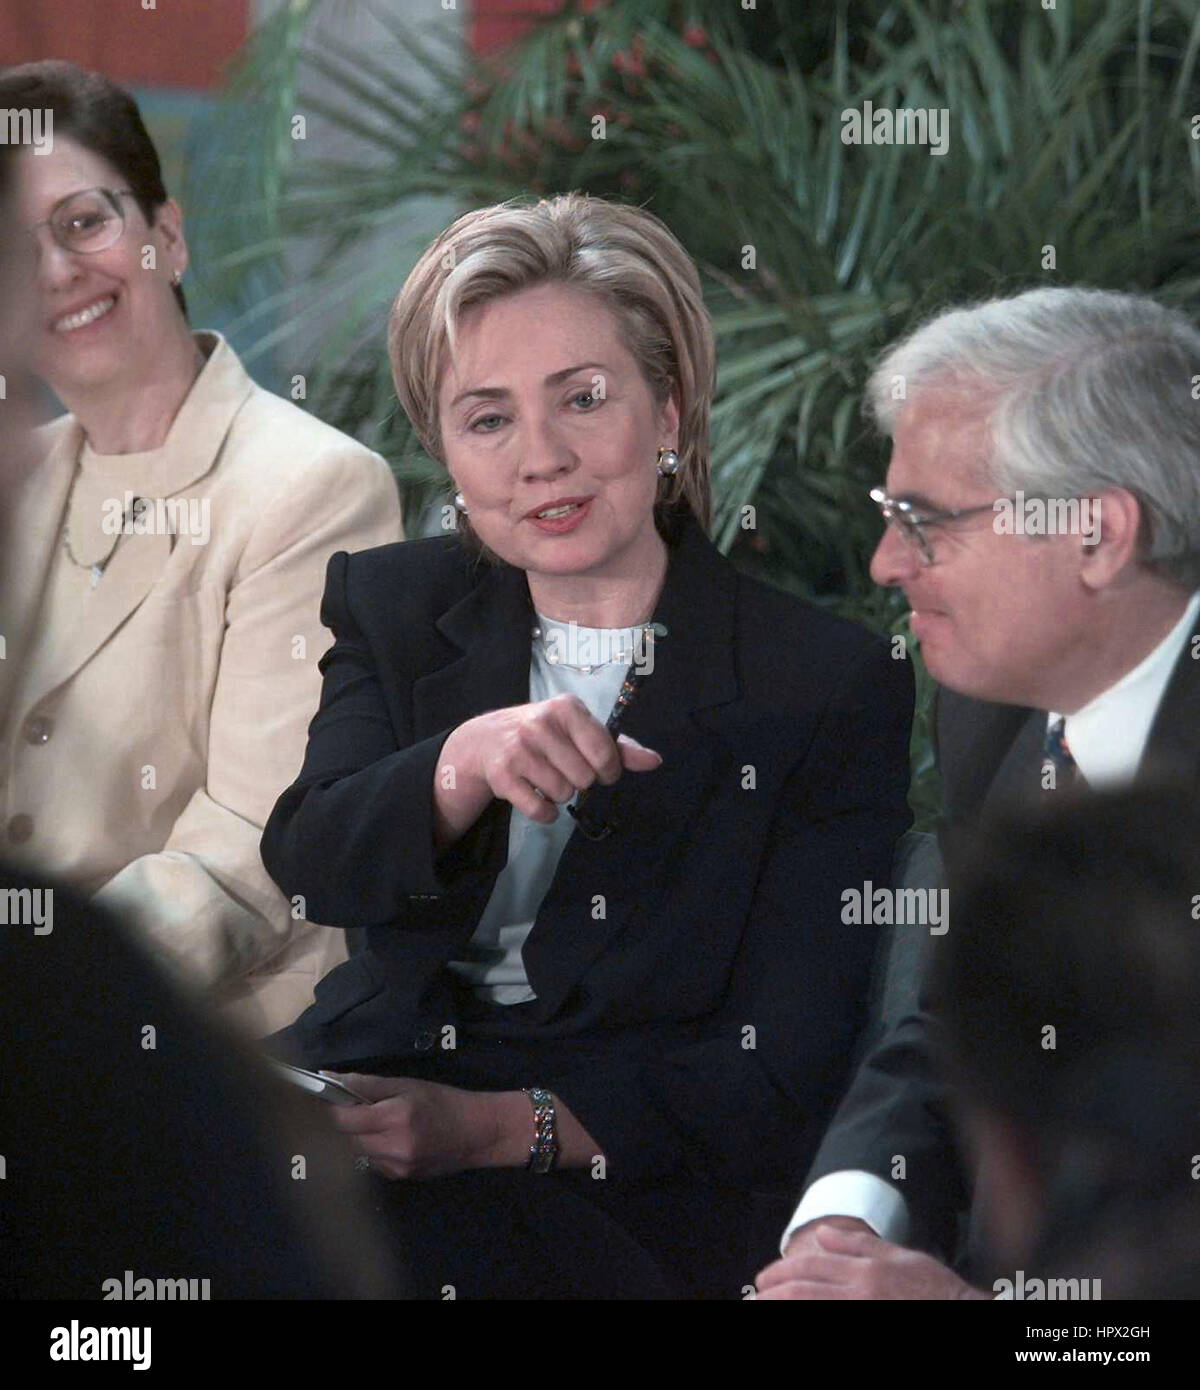 First Lady Hillary Clinton at her "Listening Tour" at Westchester Community College in Valhalla, NY on July 13, 1999. Stock Photo